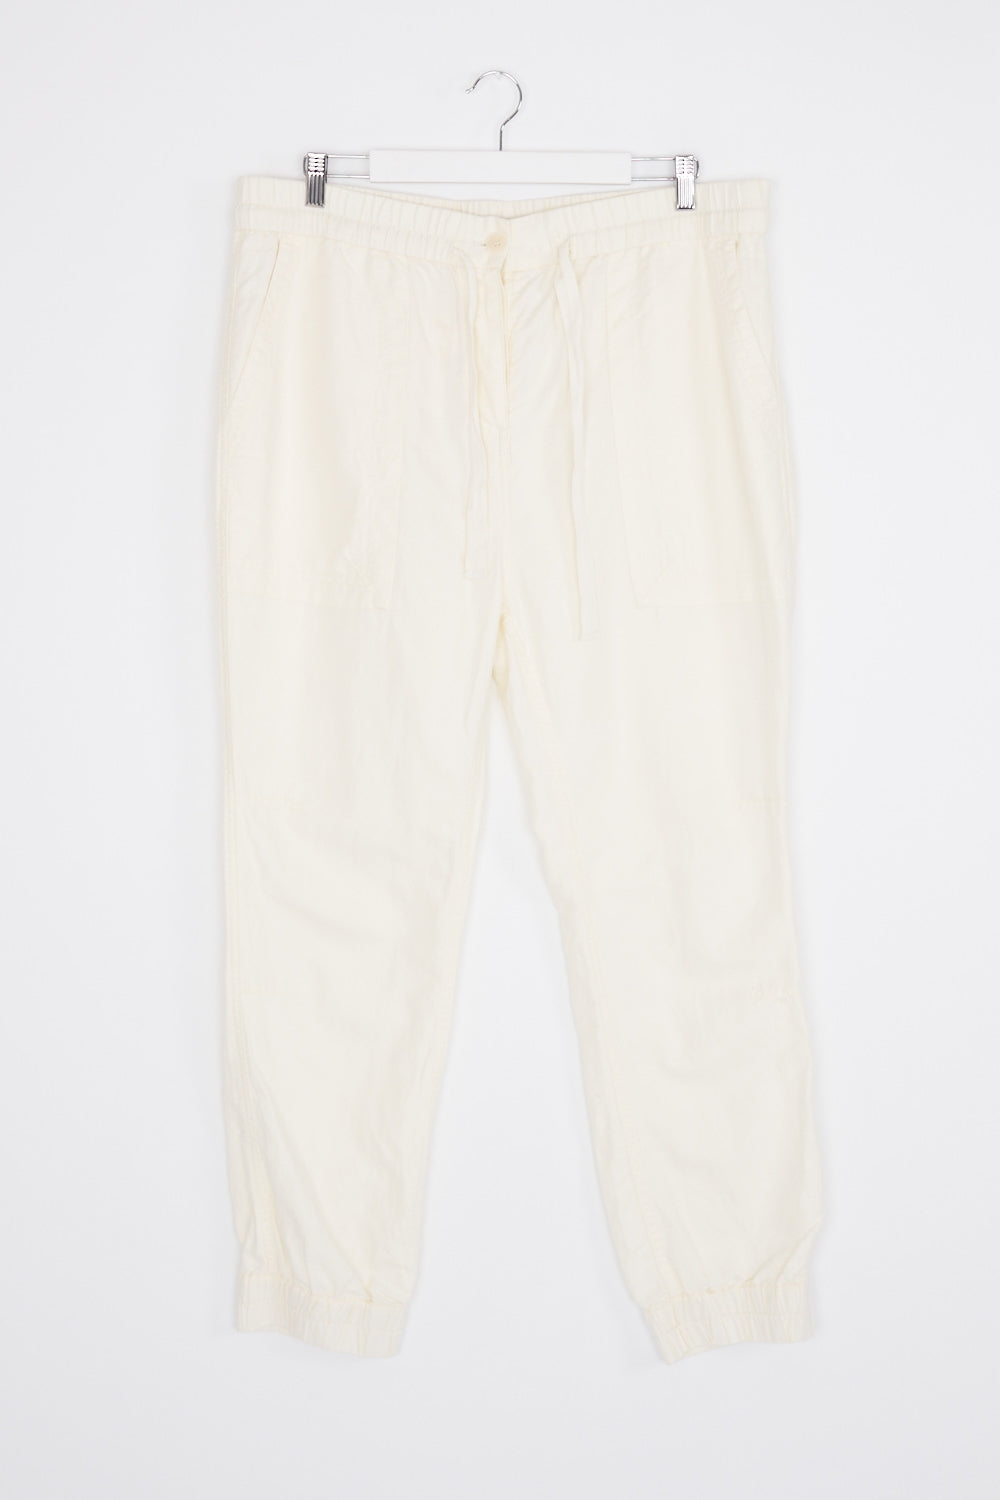 Country Road Cream Linen Blend Pants 16